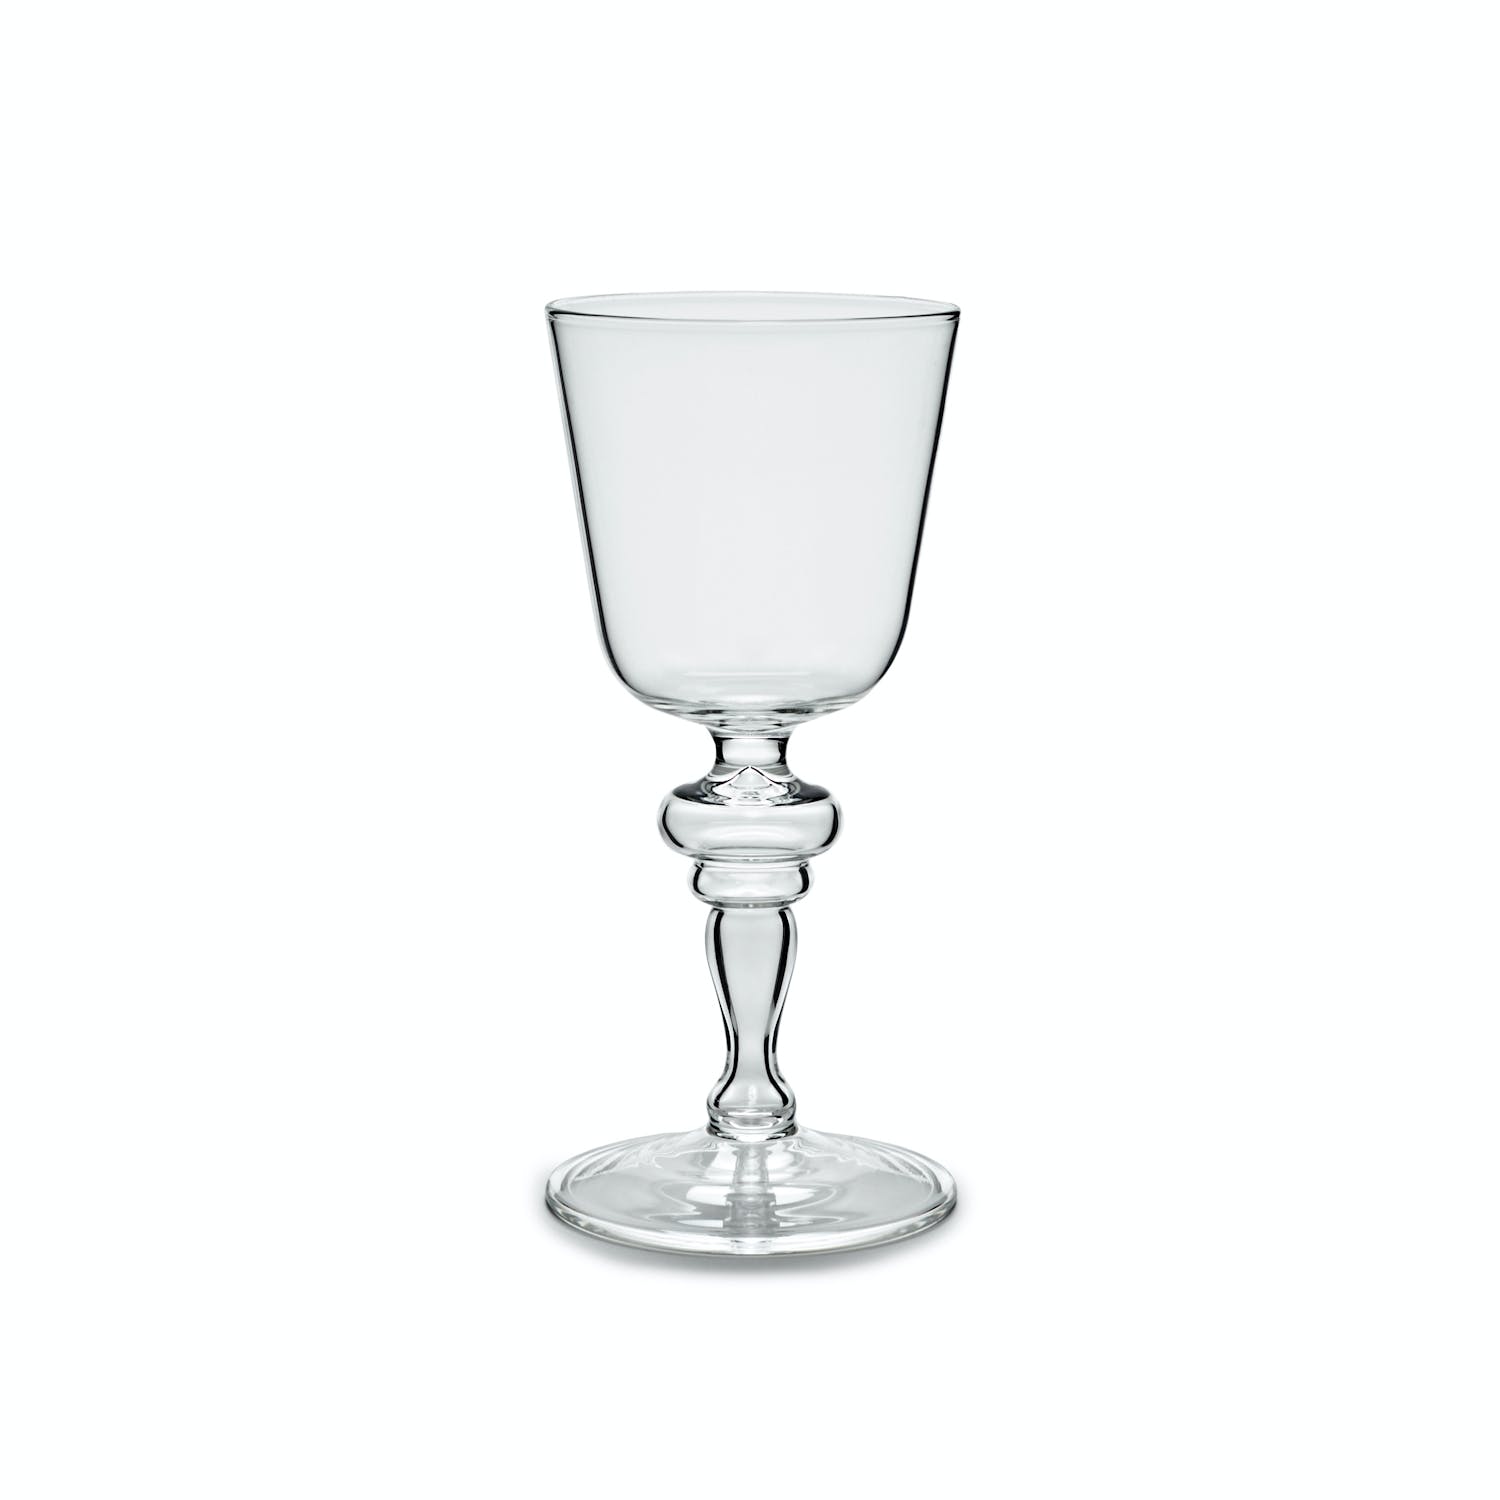 Elegant, tulip-shaped glass goblet with decorative stem for formal occasions